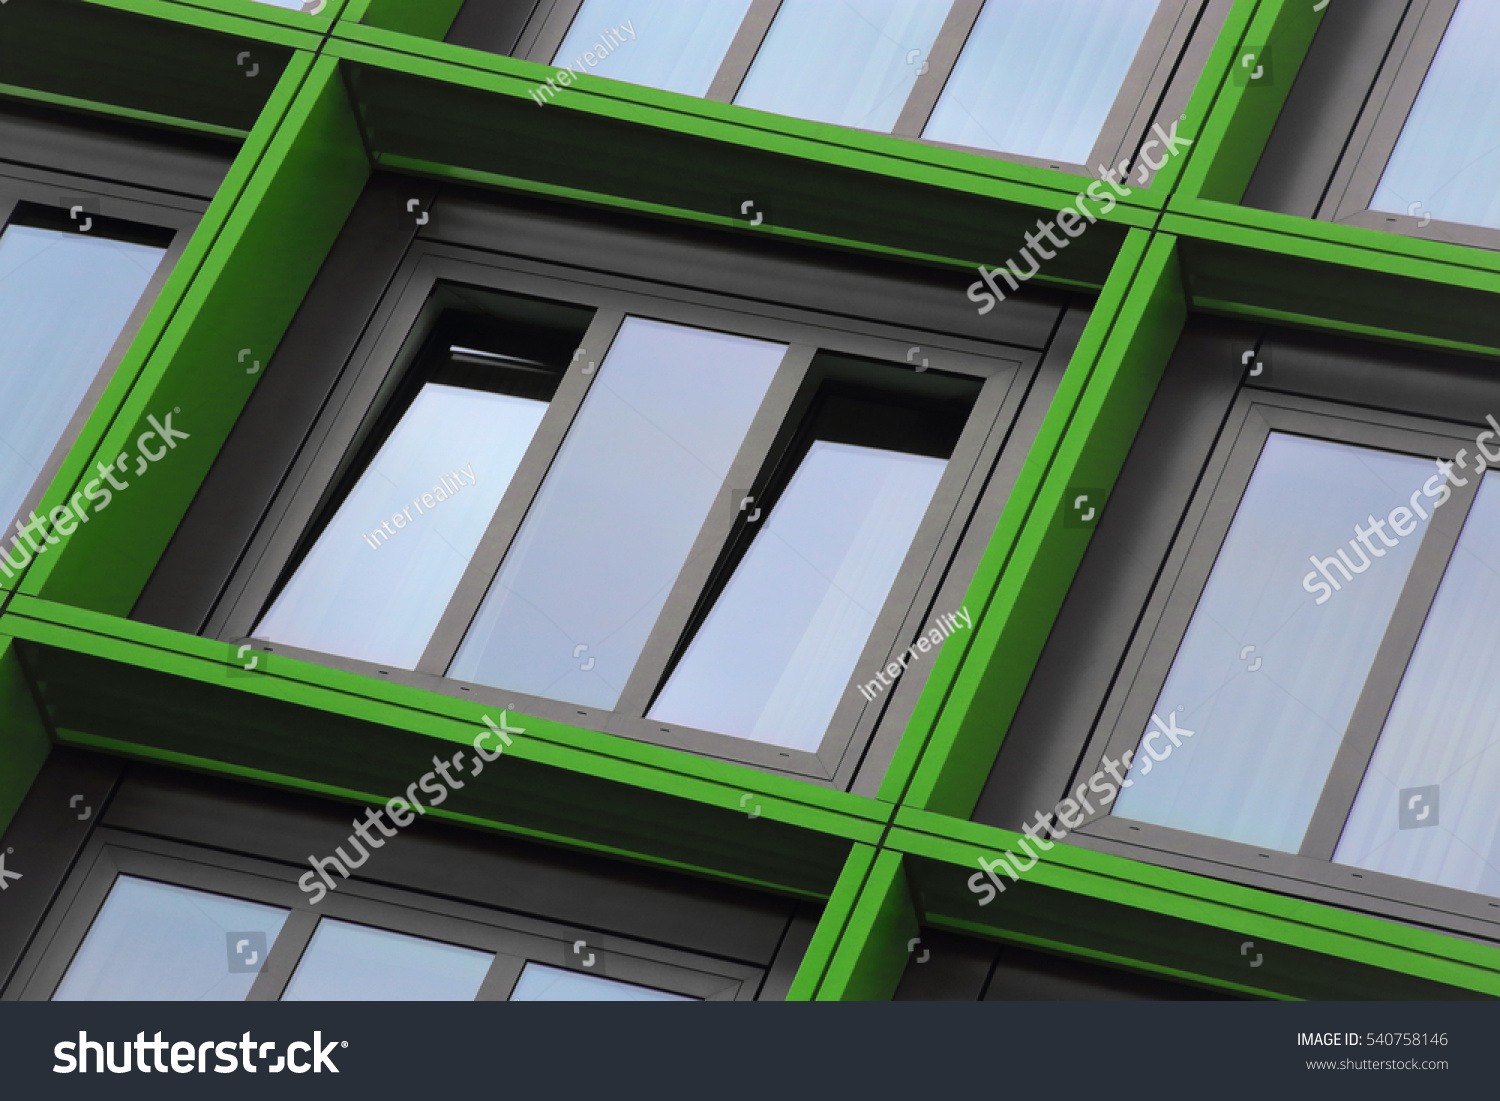 Tilt close-up photo of ajar windows in green frames. Eco-friendly technologies / energy saving motif. Building exterior detail. Abstract photo on the subject of modern architecture. #540758146